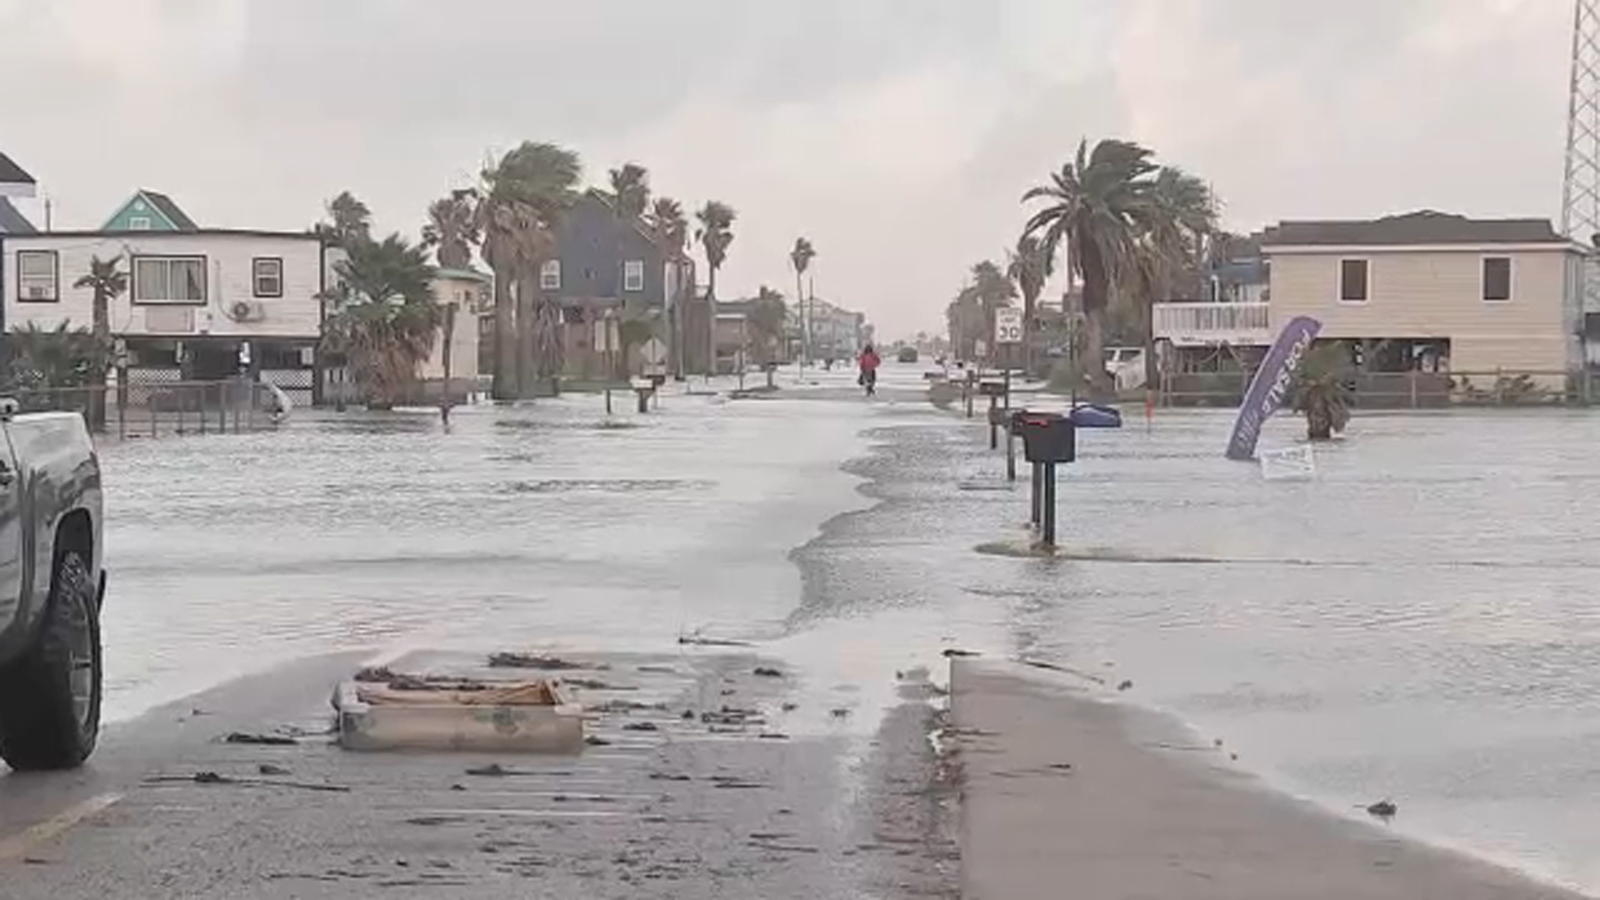 High tide and storm surge causes flooding in Surfside as Tropical Storm Alberto moves inland